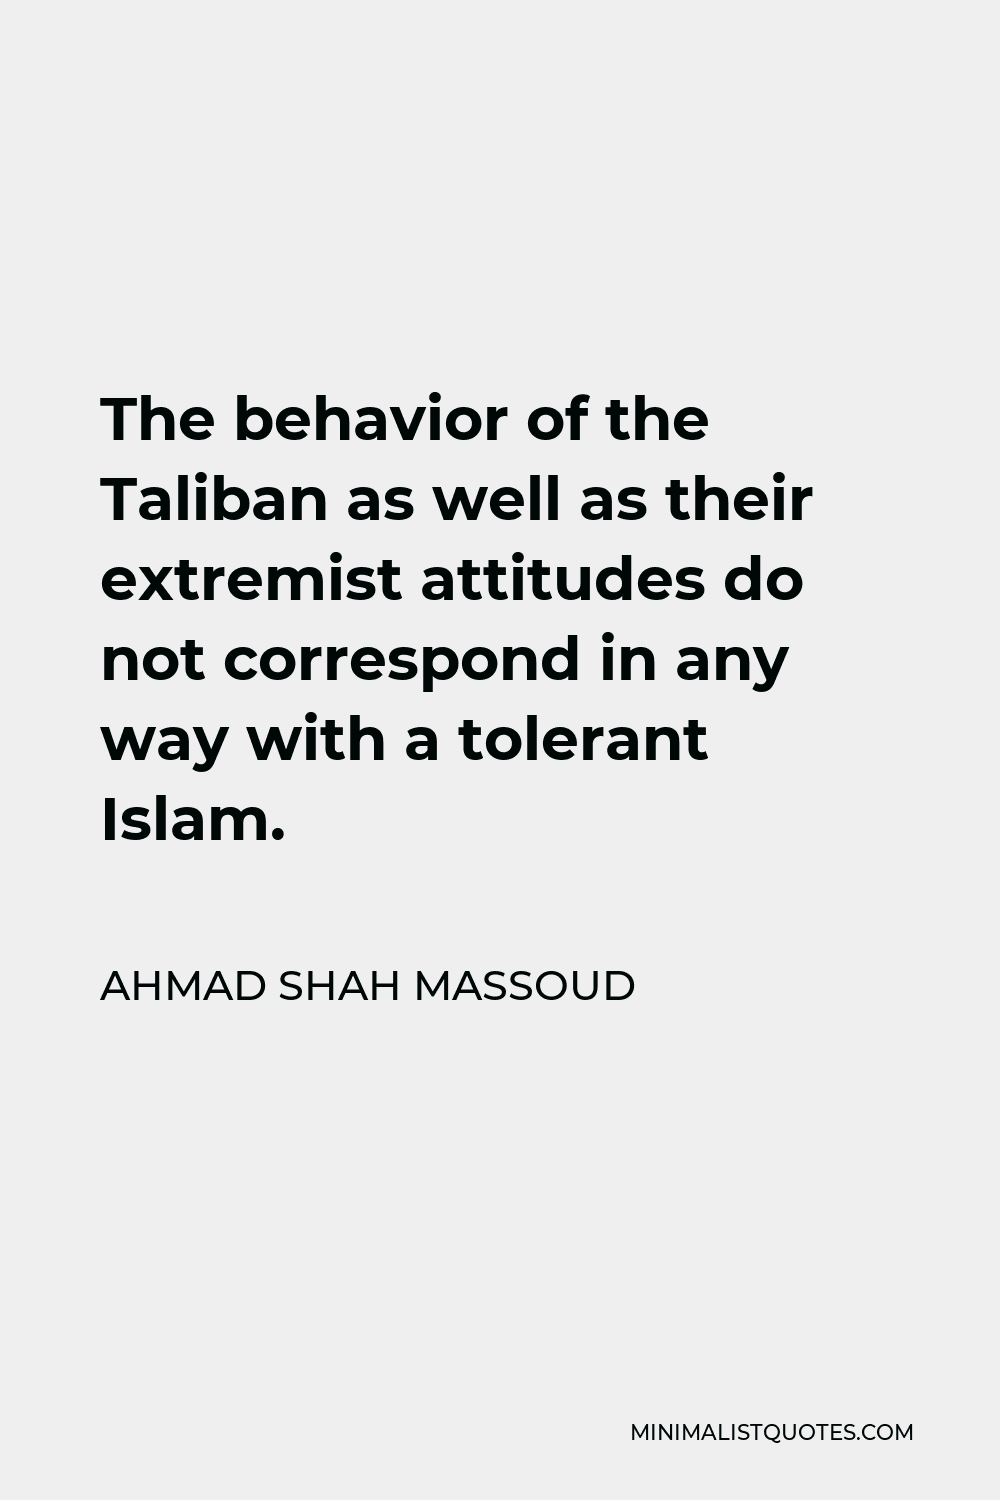 Ahmad Shah Massoud Quote - The behavior of the Taliban as well as their extremist attitudes do not correspond in any way with a tolerant Islam.